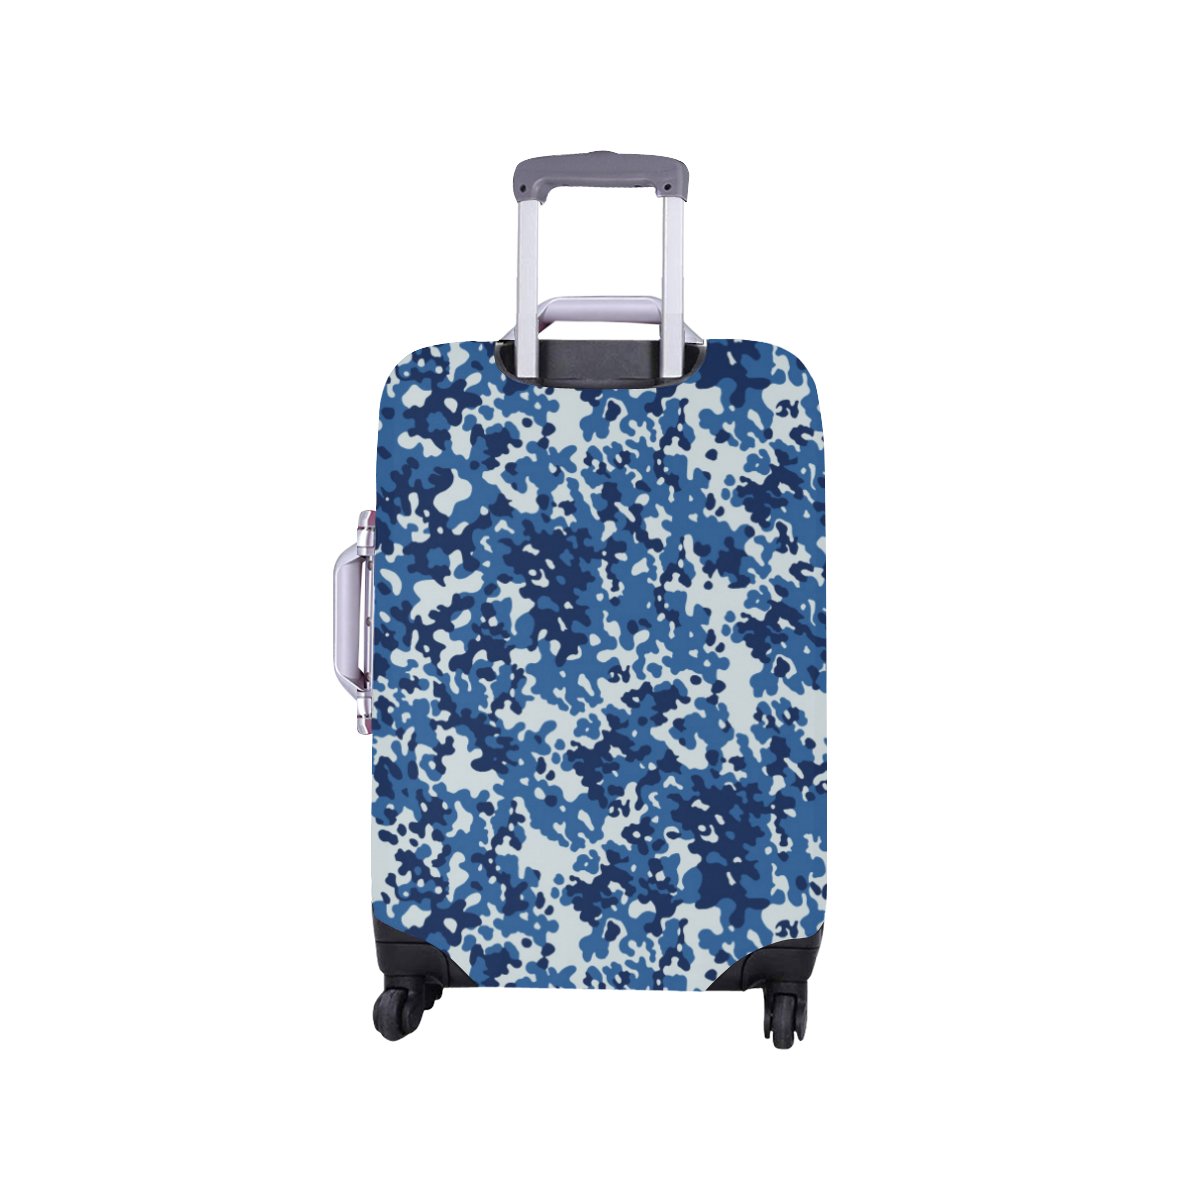 Digital Blue Camouflage Luggage Cover/Small 18"-21"